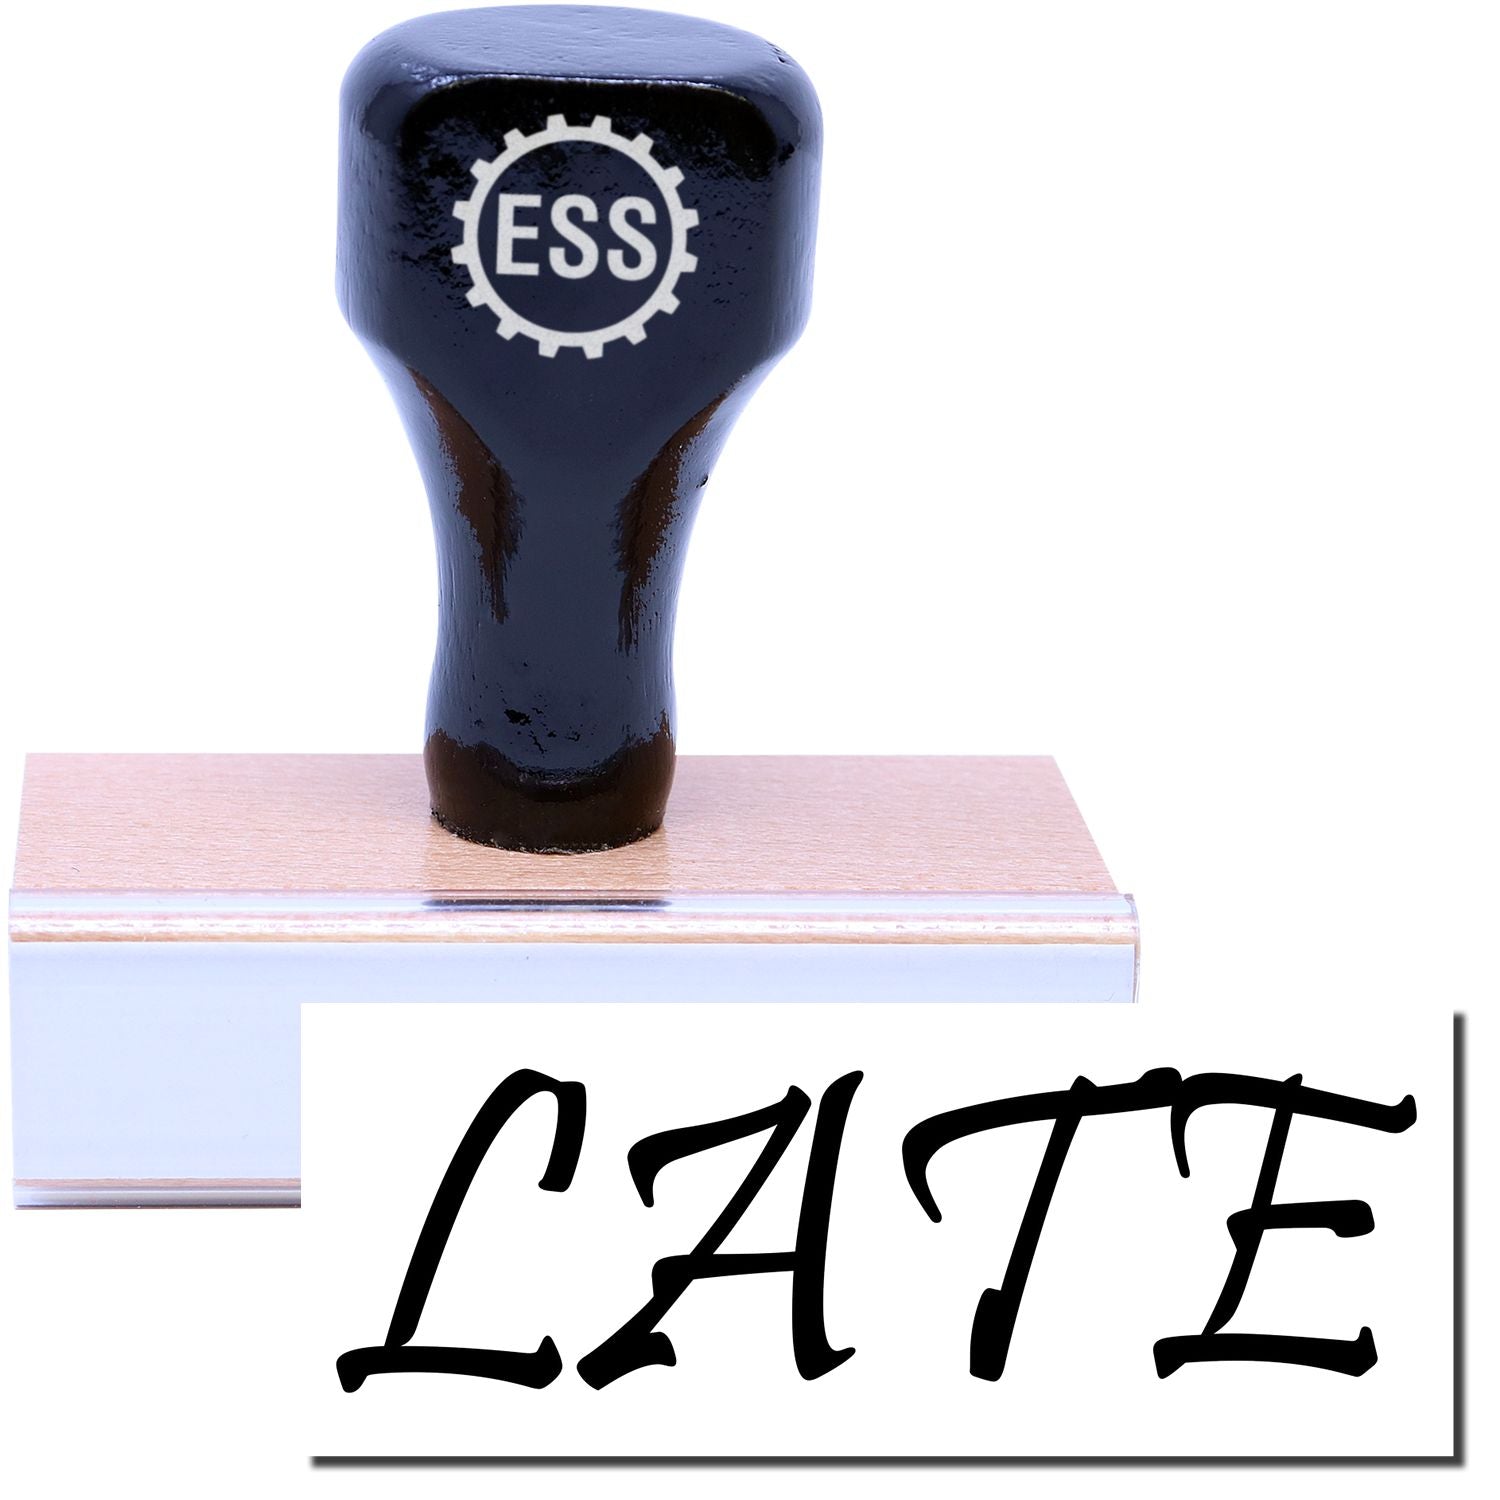 A stock office rubber stamp with a stamped image showing how the text "LATE" in a large font is displayed after stamping.